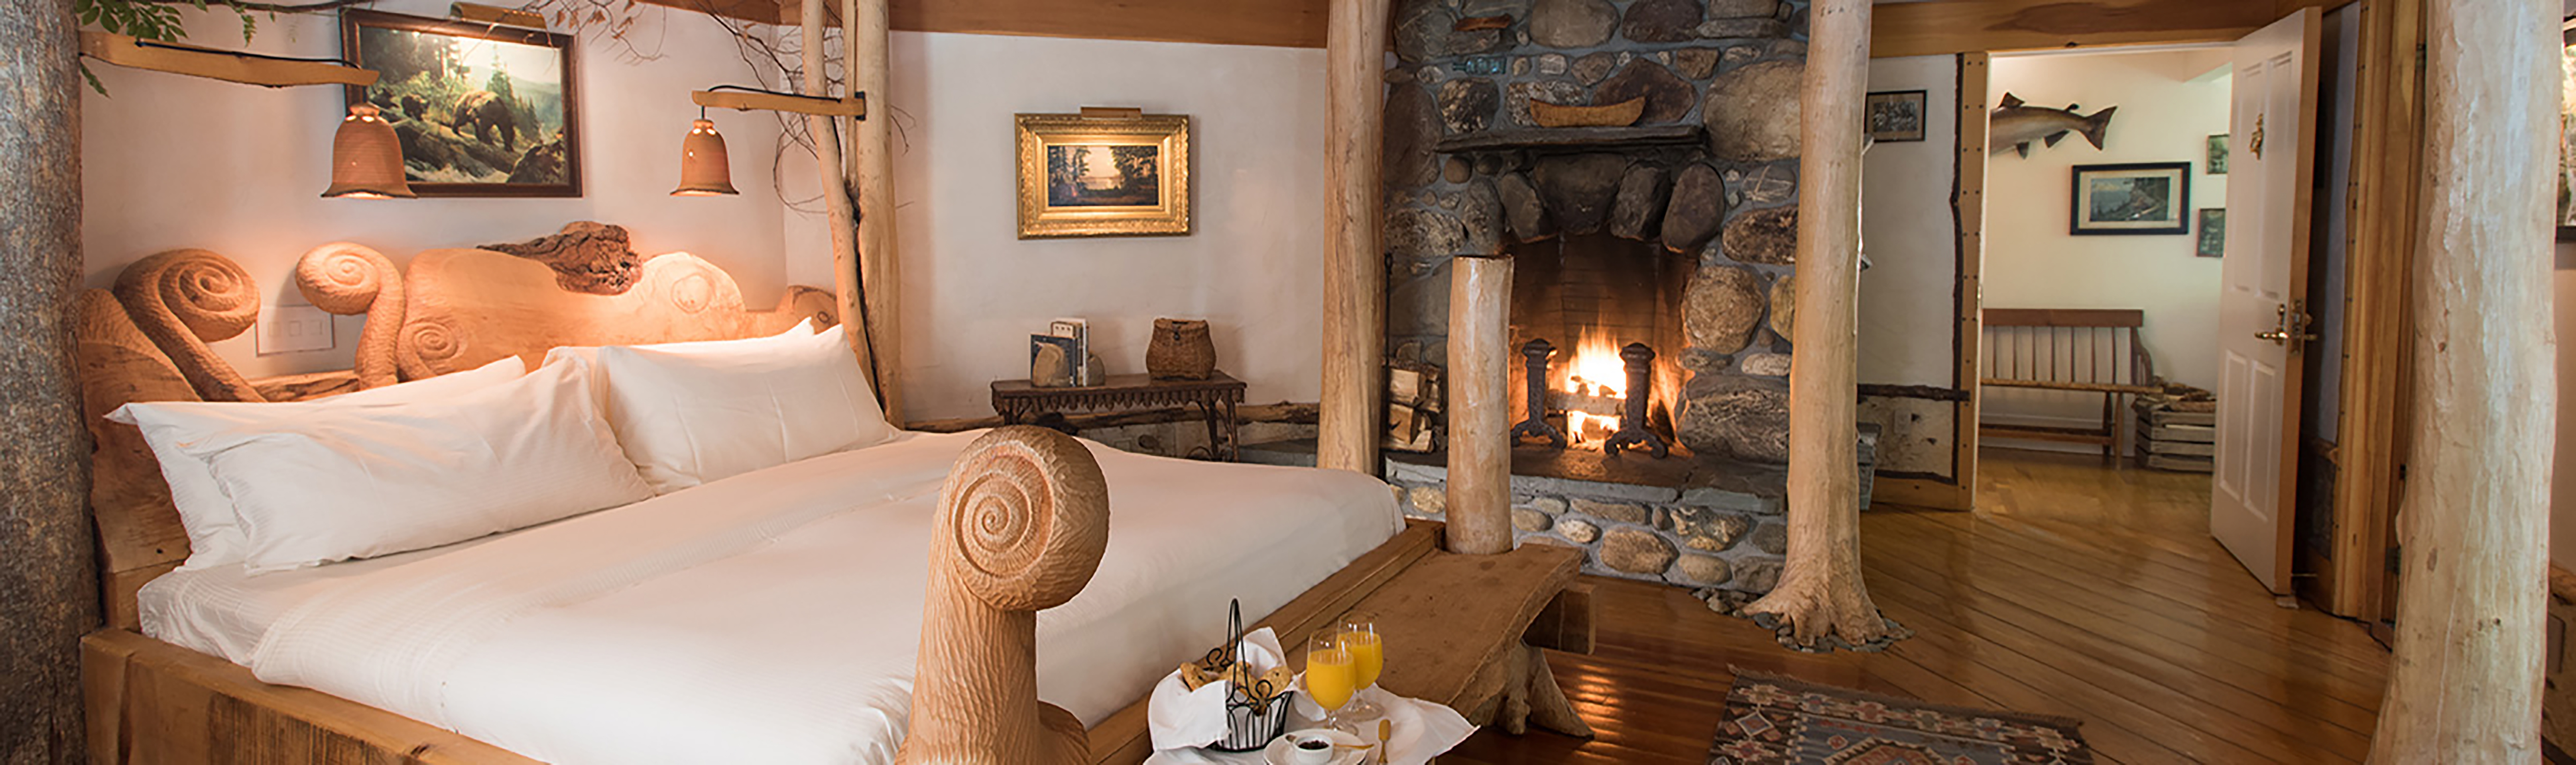 The Pitcher Inn in Vermont has working fireplaces in each of its uniquely themed rooms, like this one in the Trout Room.